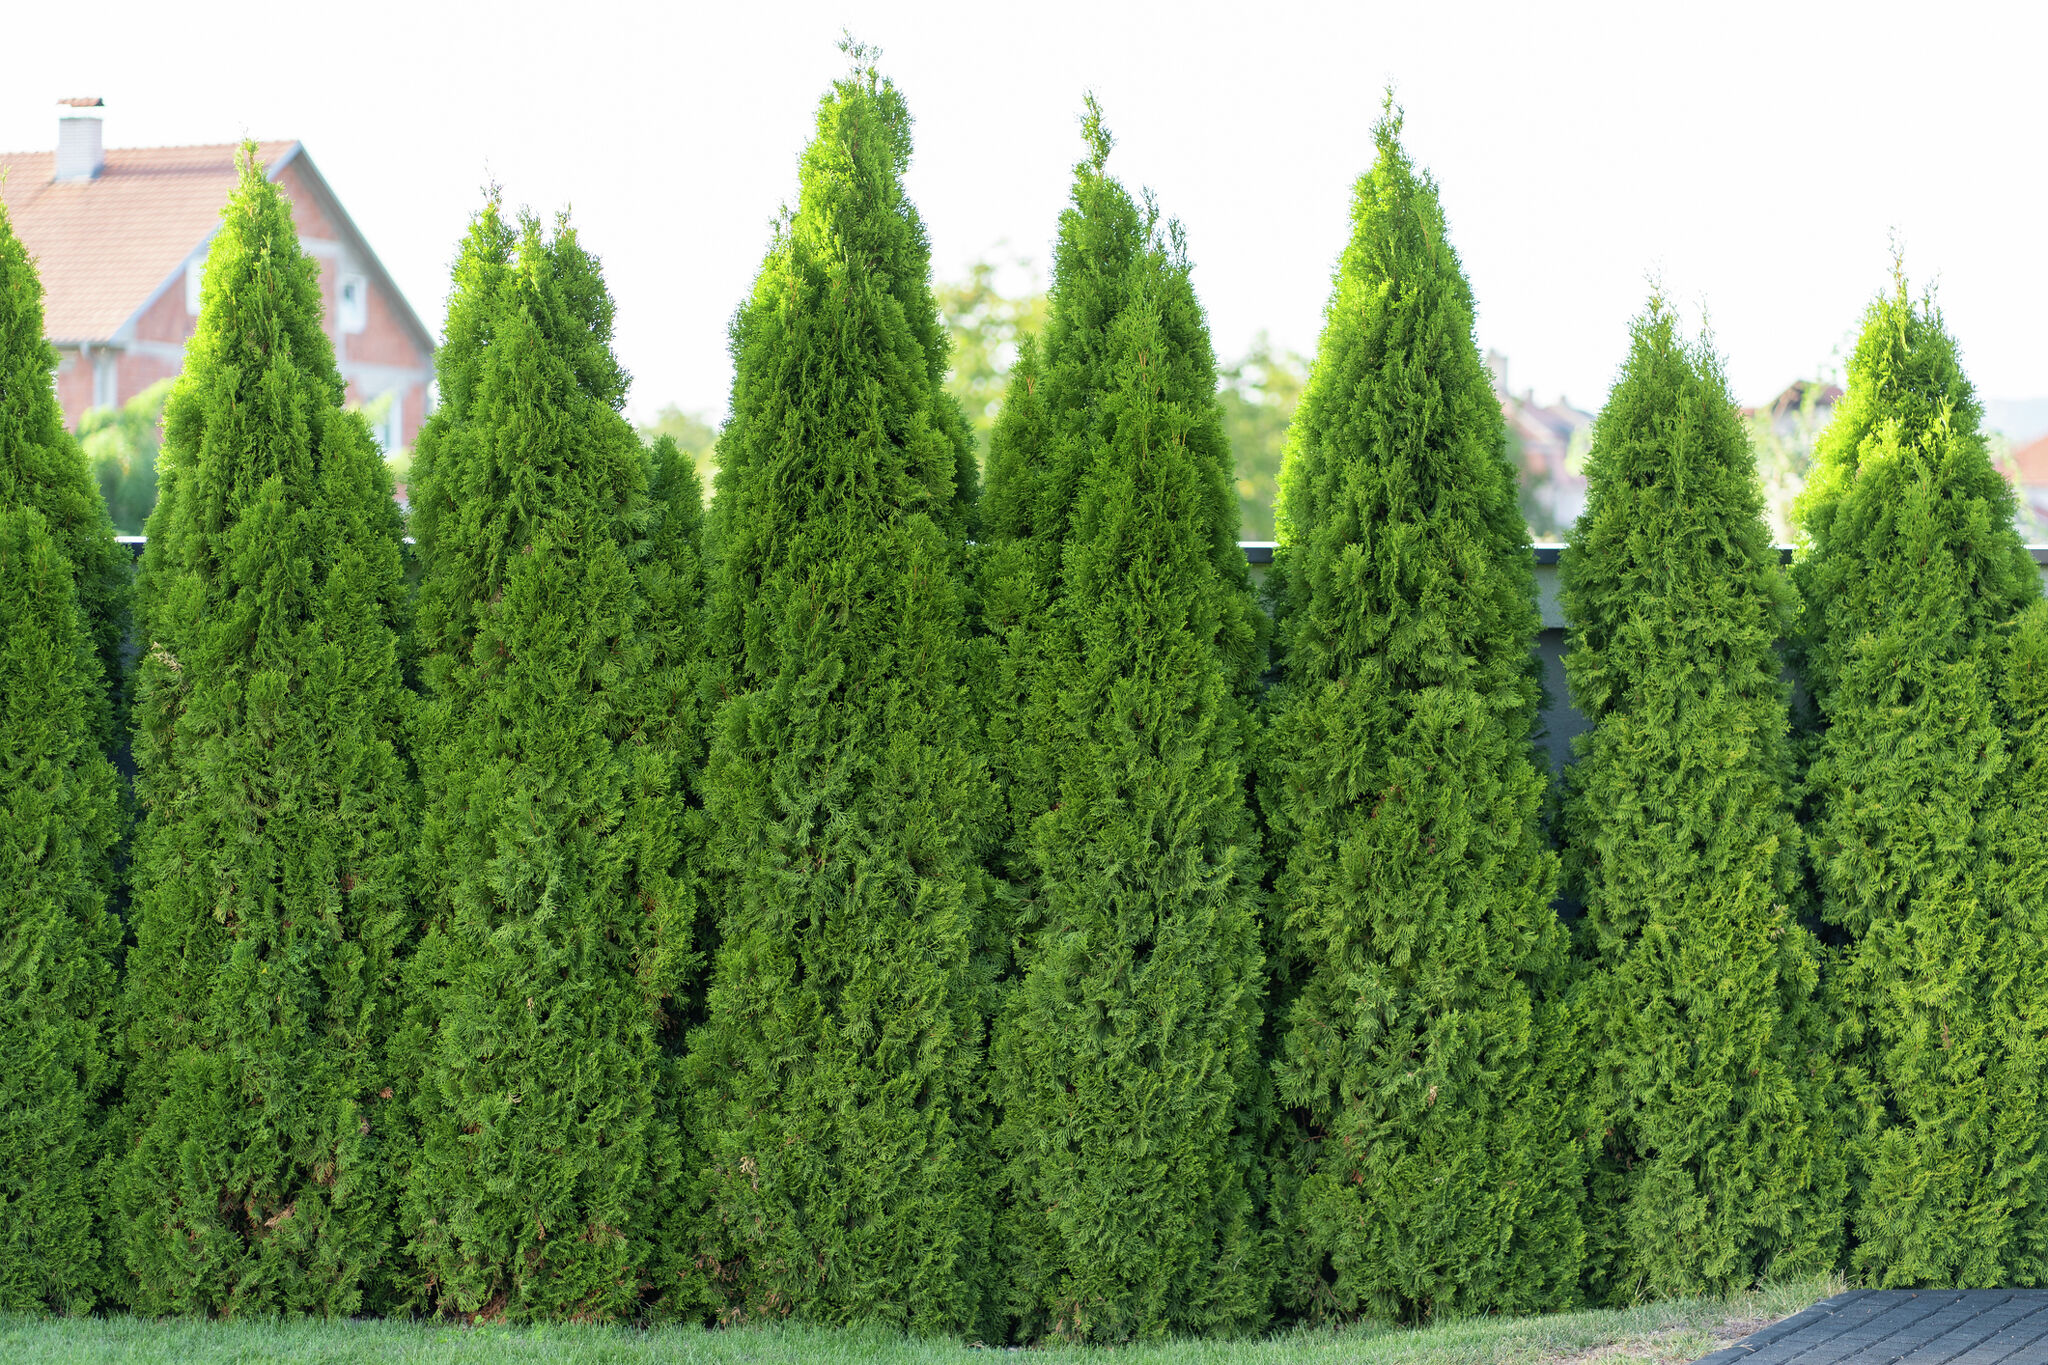 The Cheapest Trees to Create Privacy in Yards